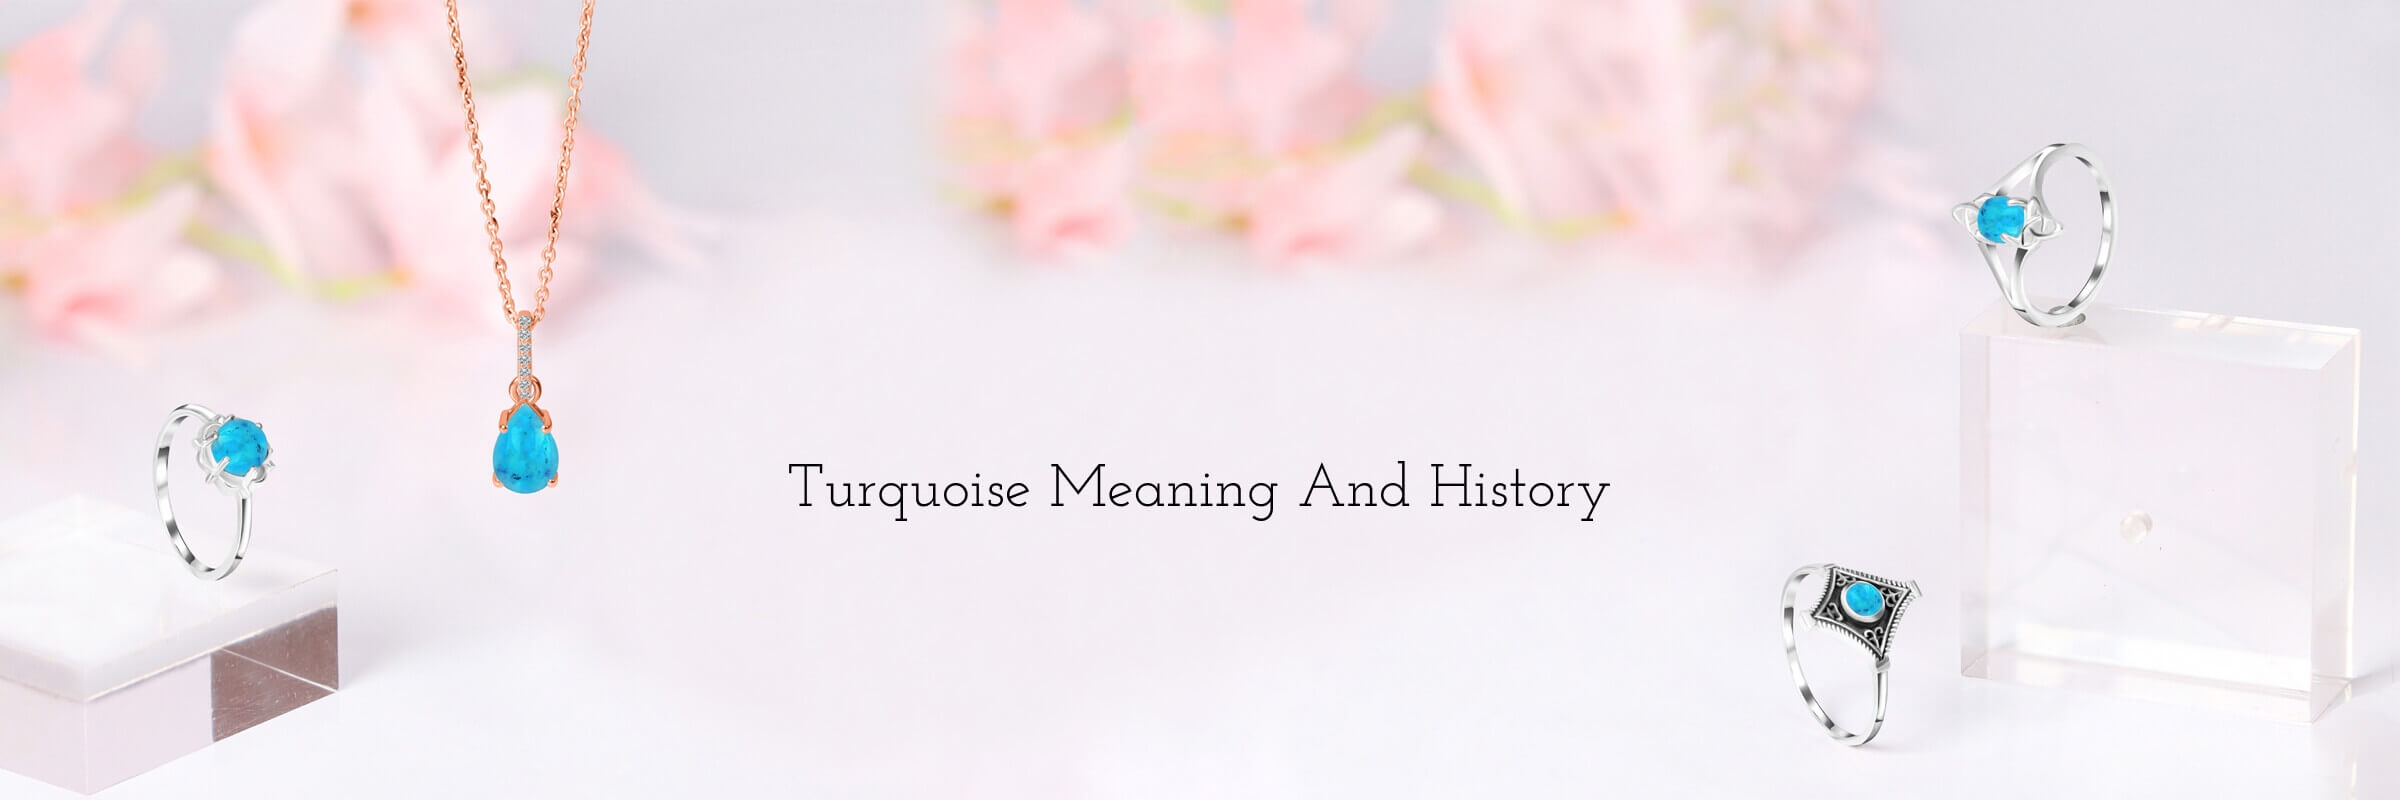 Turquoise Meaning And History